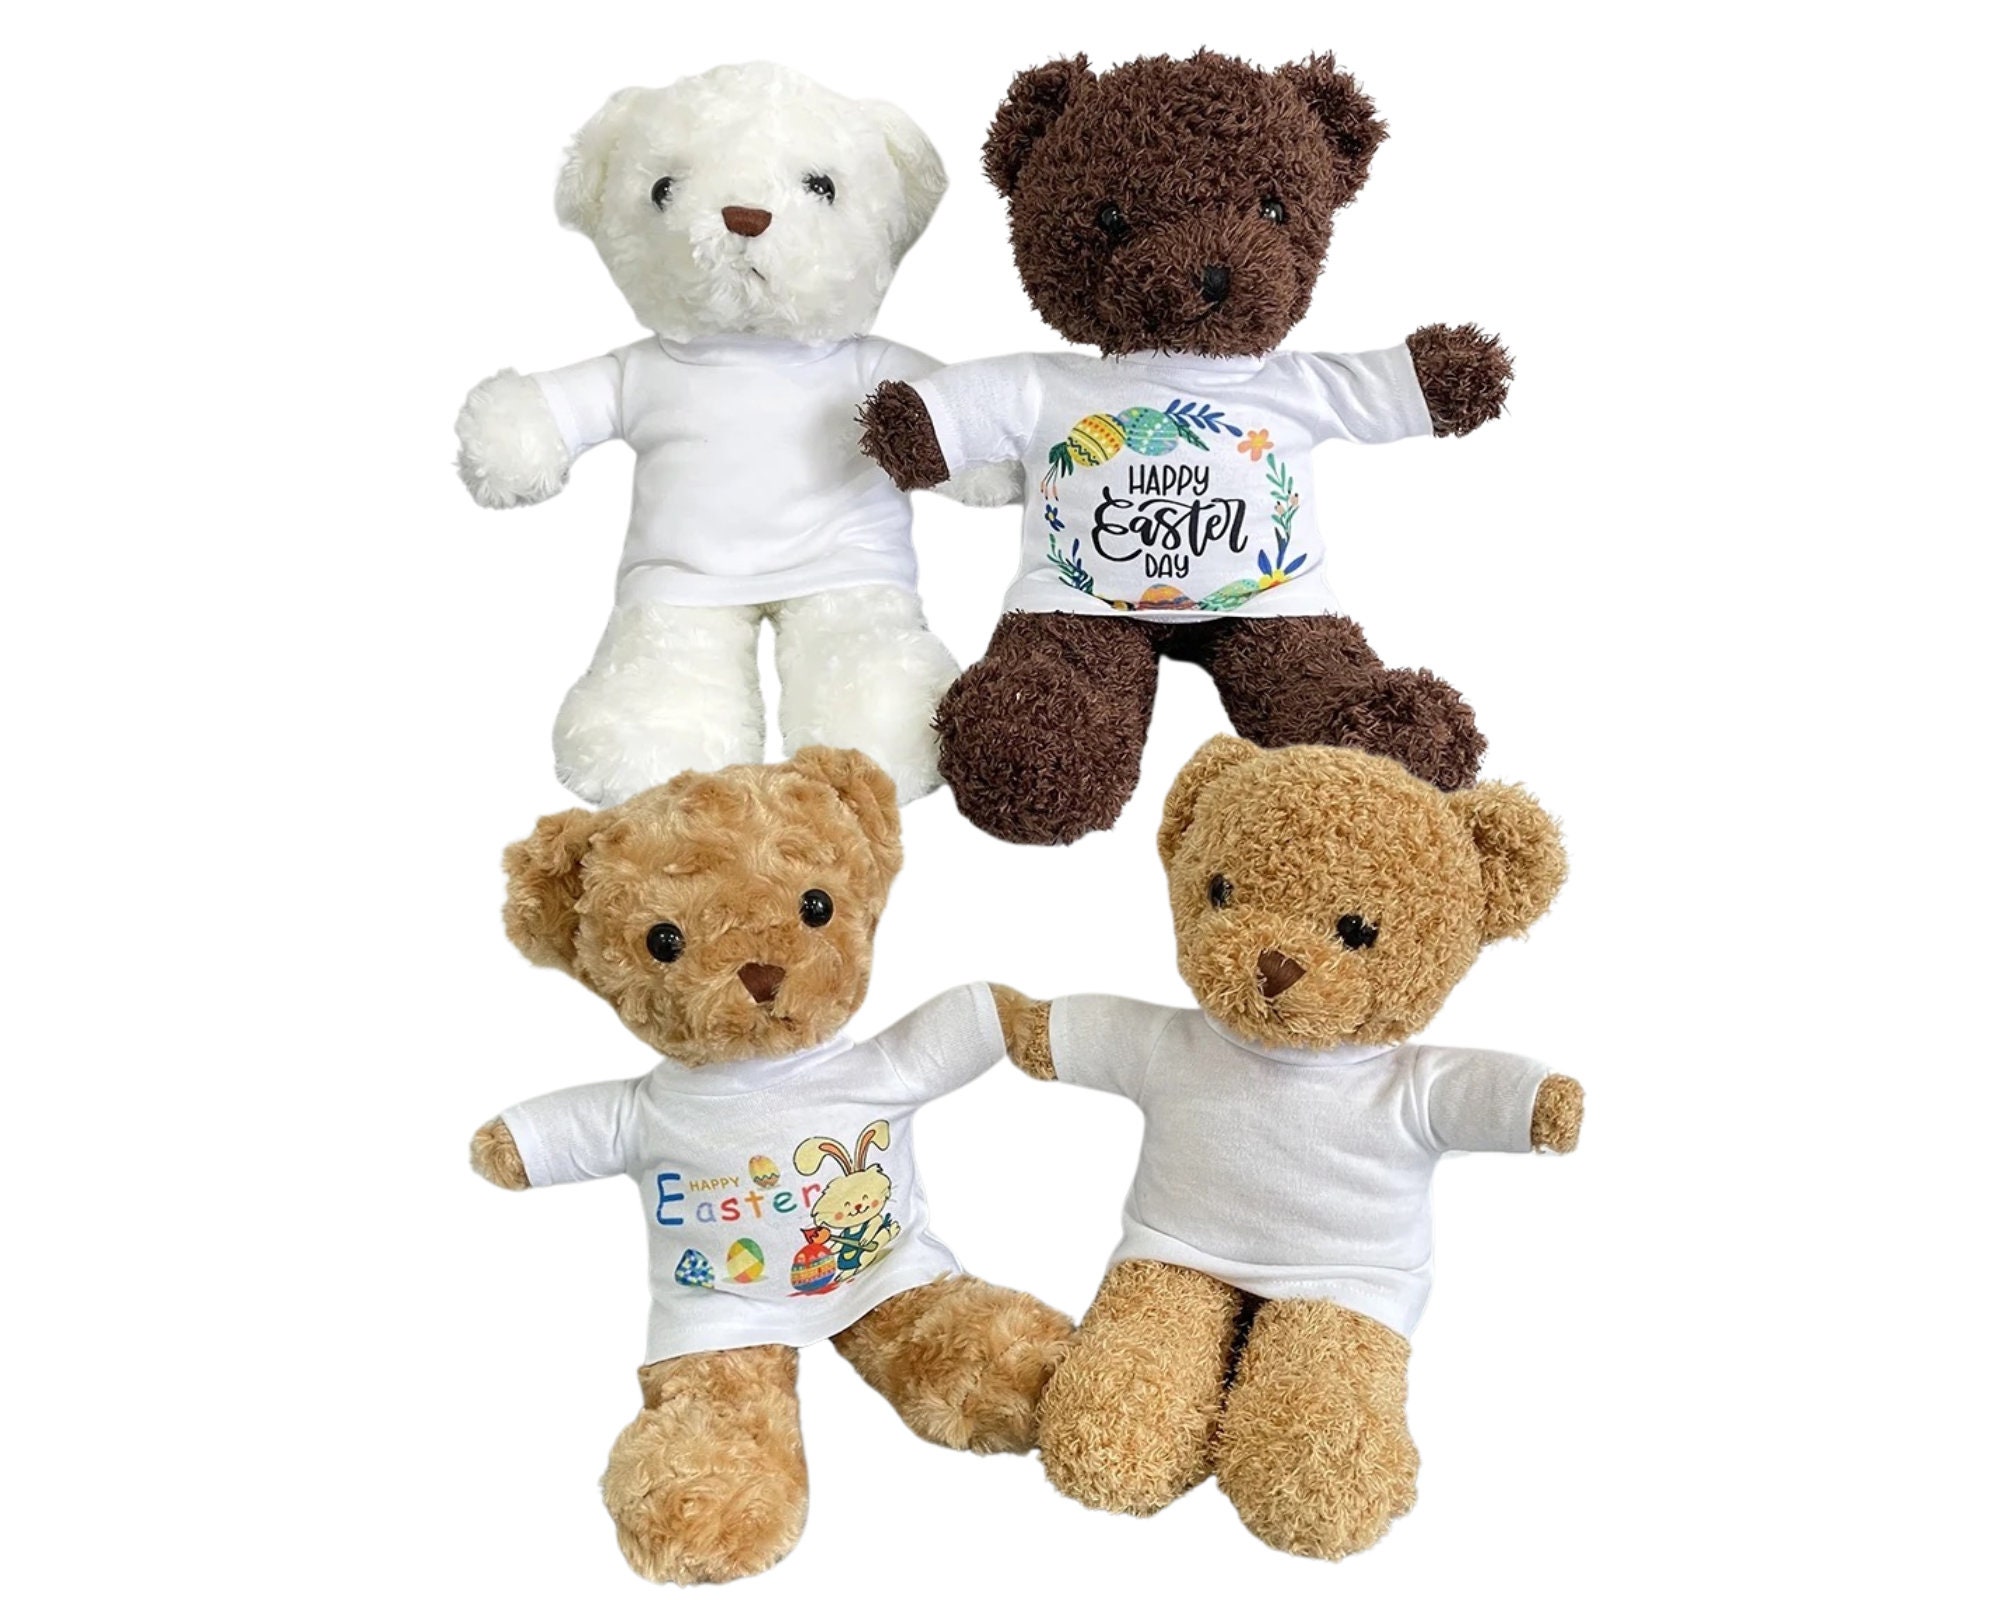 Plush Teddy Bear Hoodie for Sublimation – Sublimation Blanks